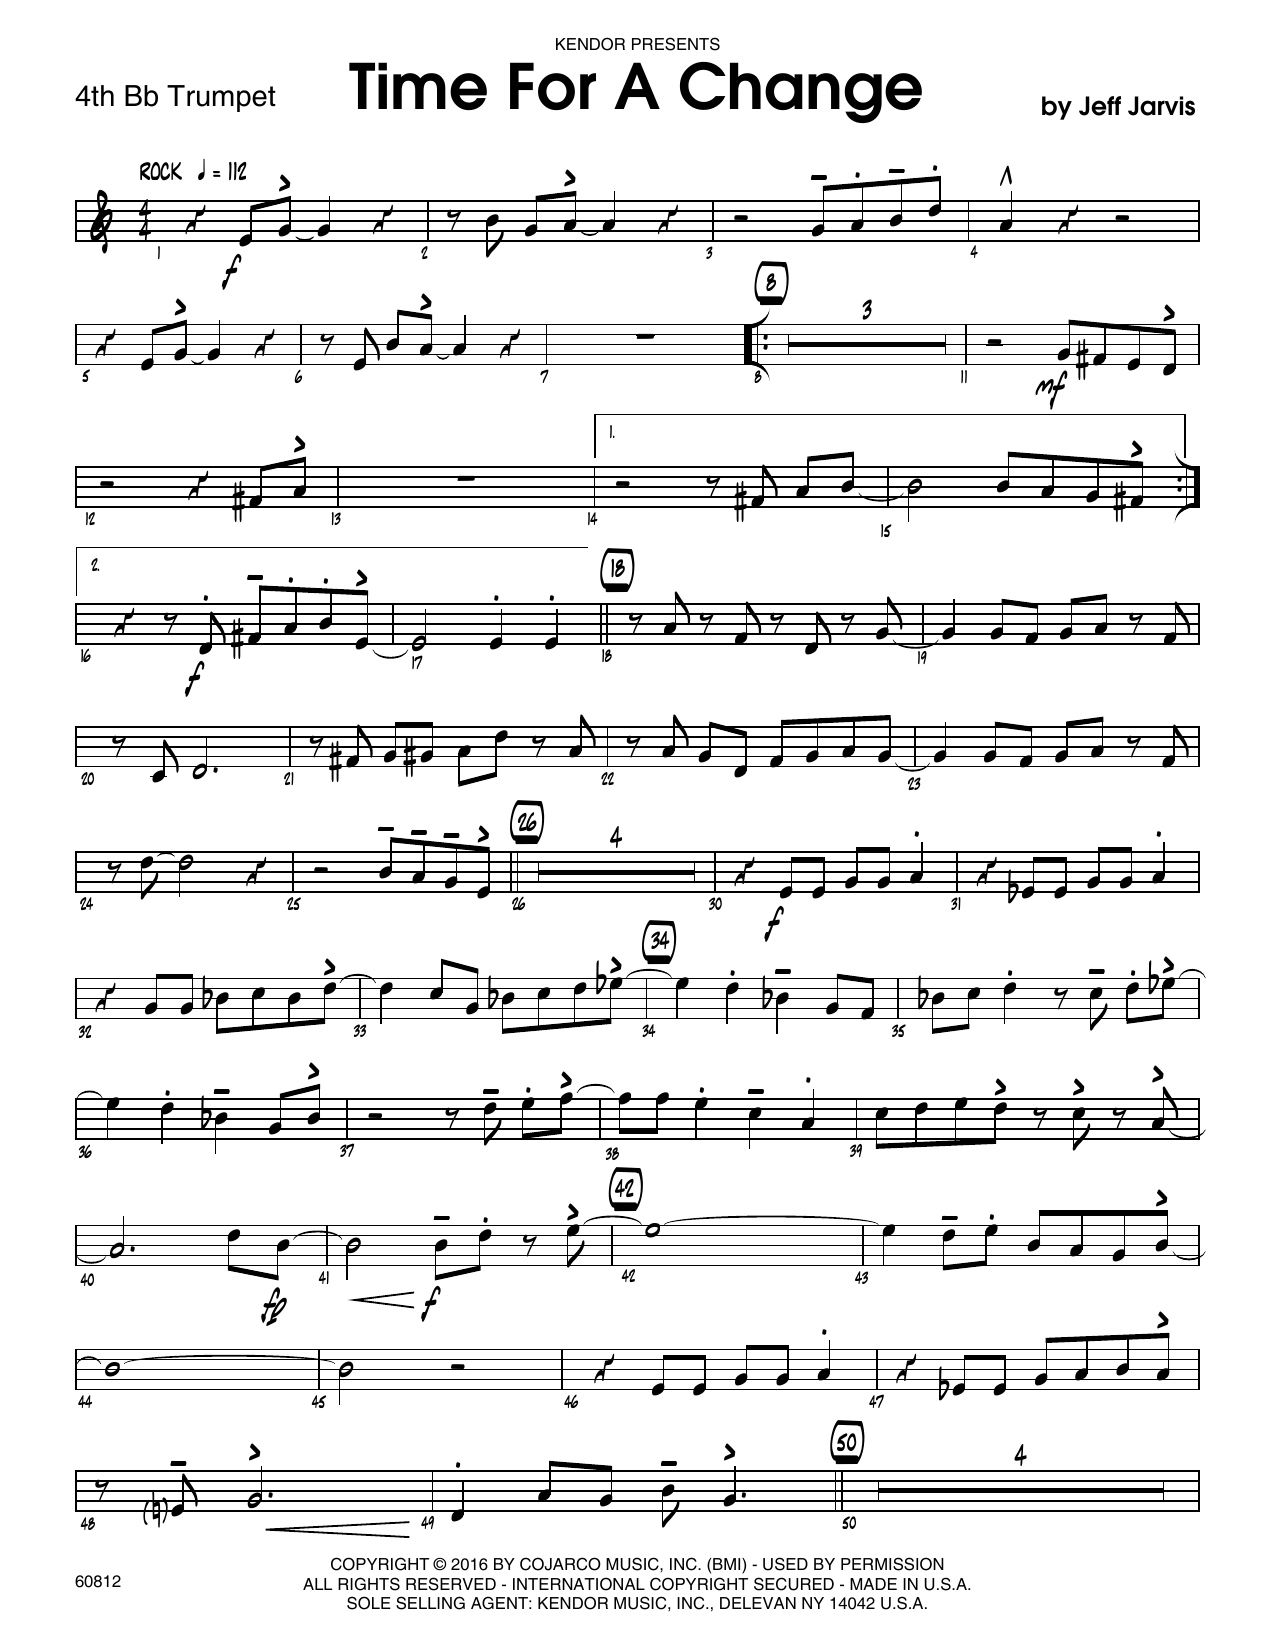 Download Jeff Jarvis Time For A Change - 4th Bb Trumpet Sheet Music